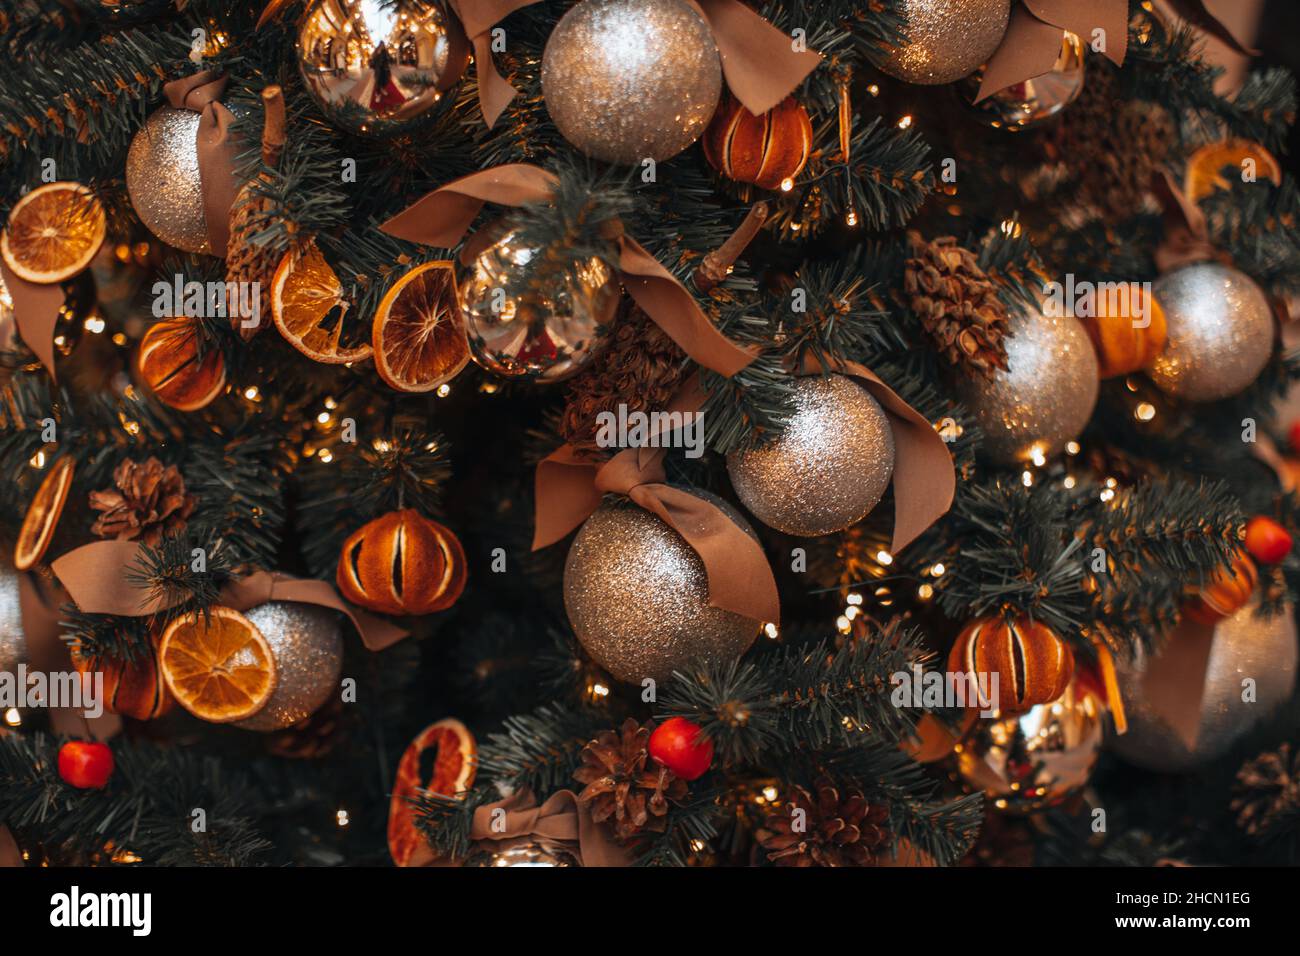 Dried mandarins, oranges, pine cones Christmas balls hanging on the Christmas tree branches. Cozy winter details and golden magic bokeh lights. Winter Stock Photo